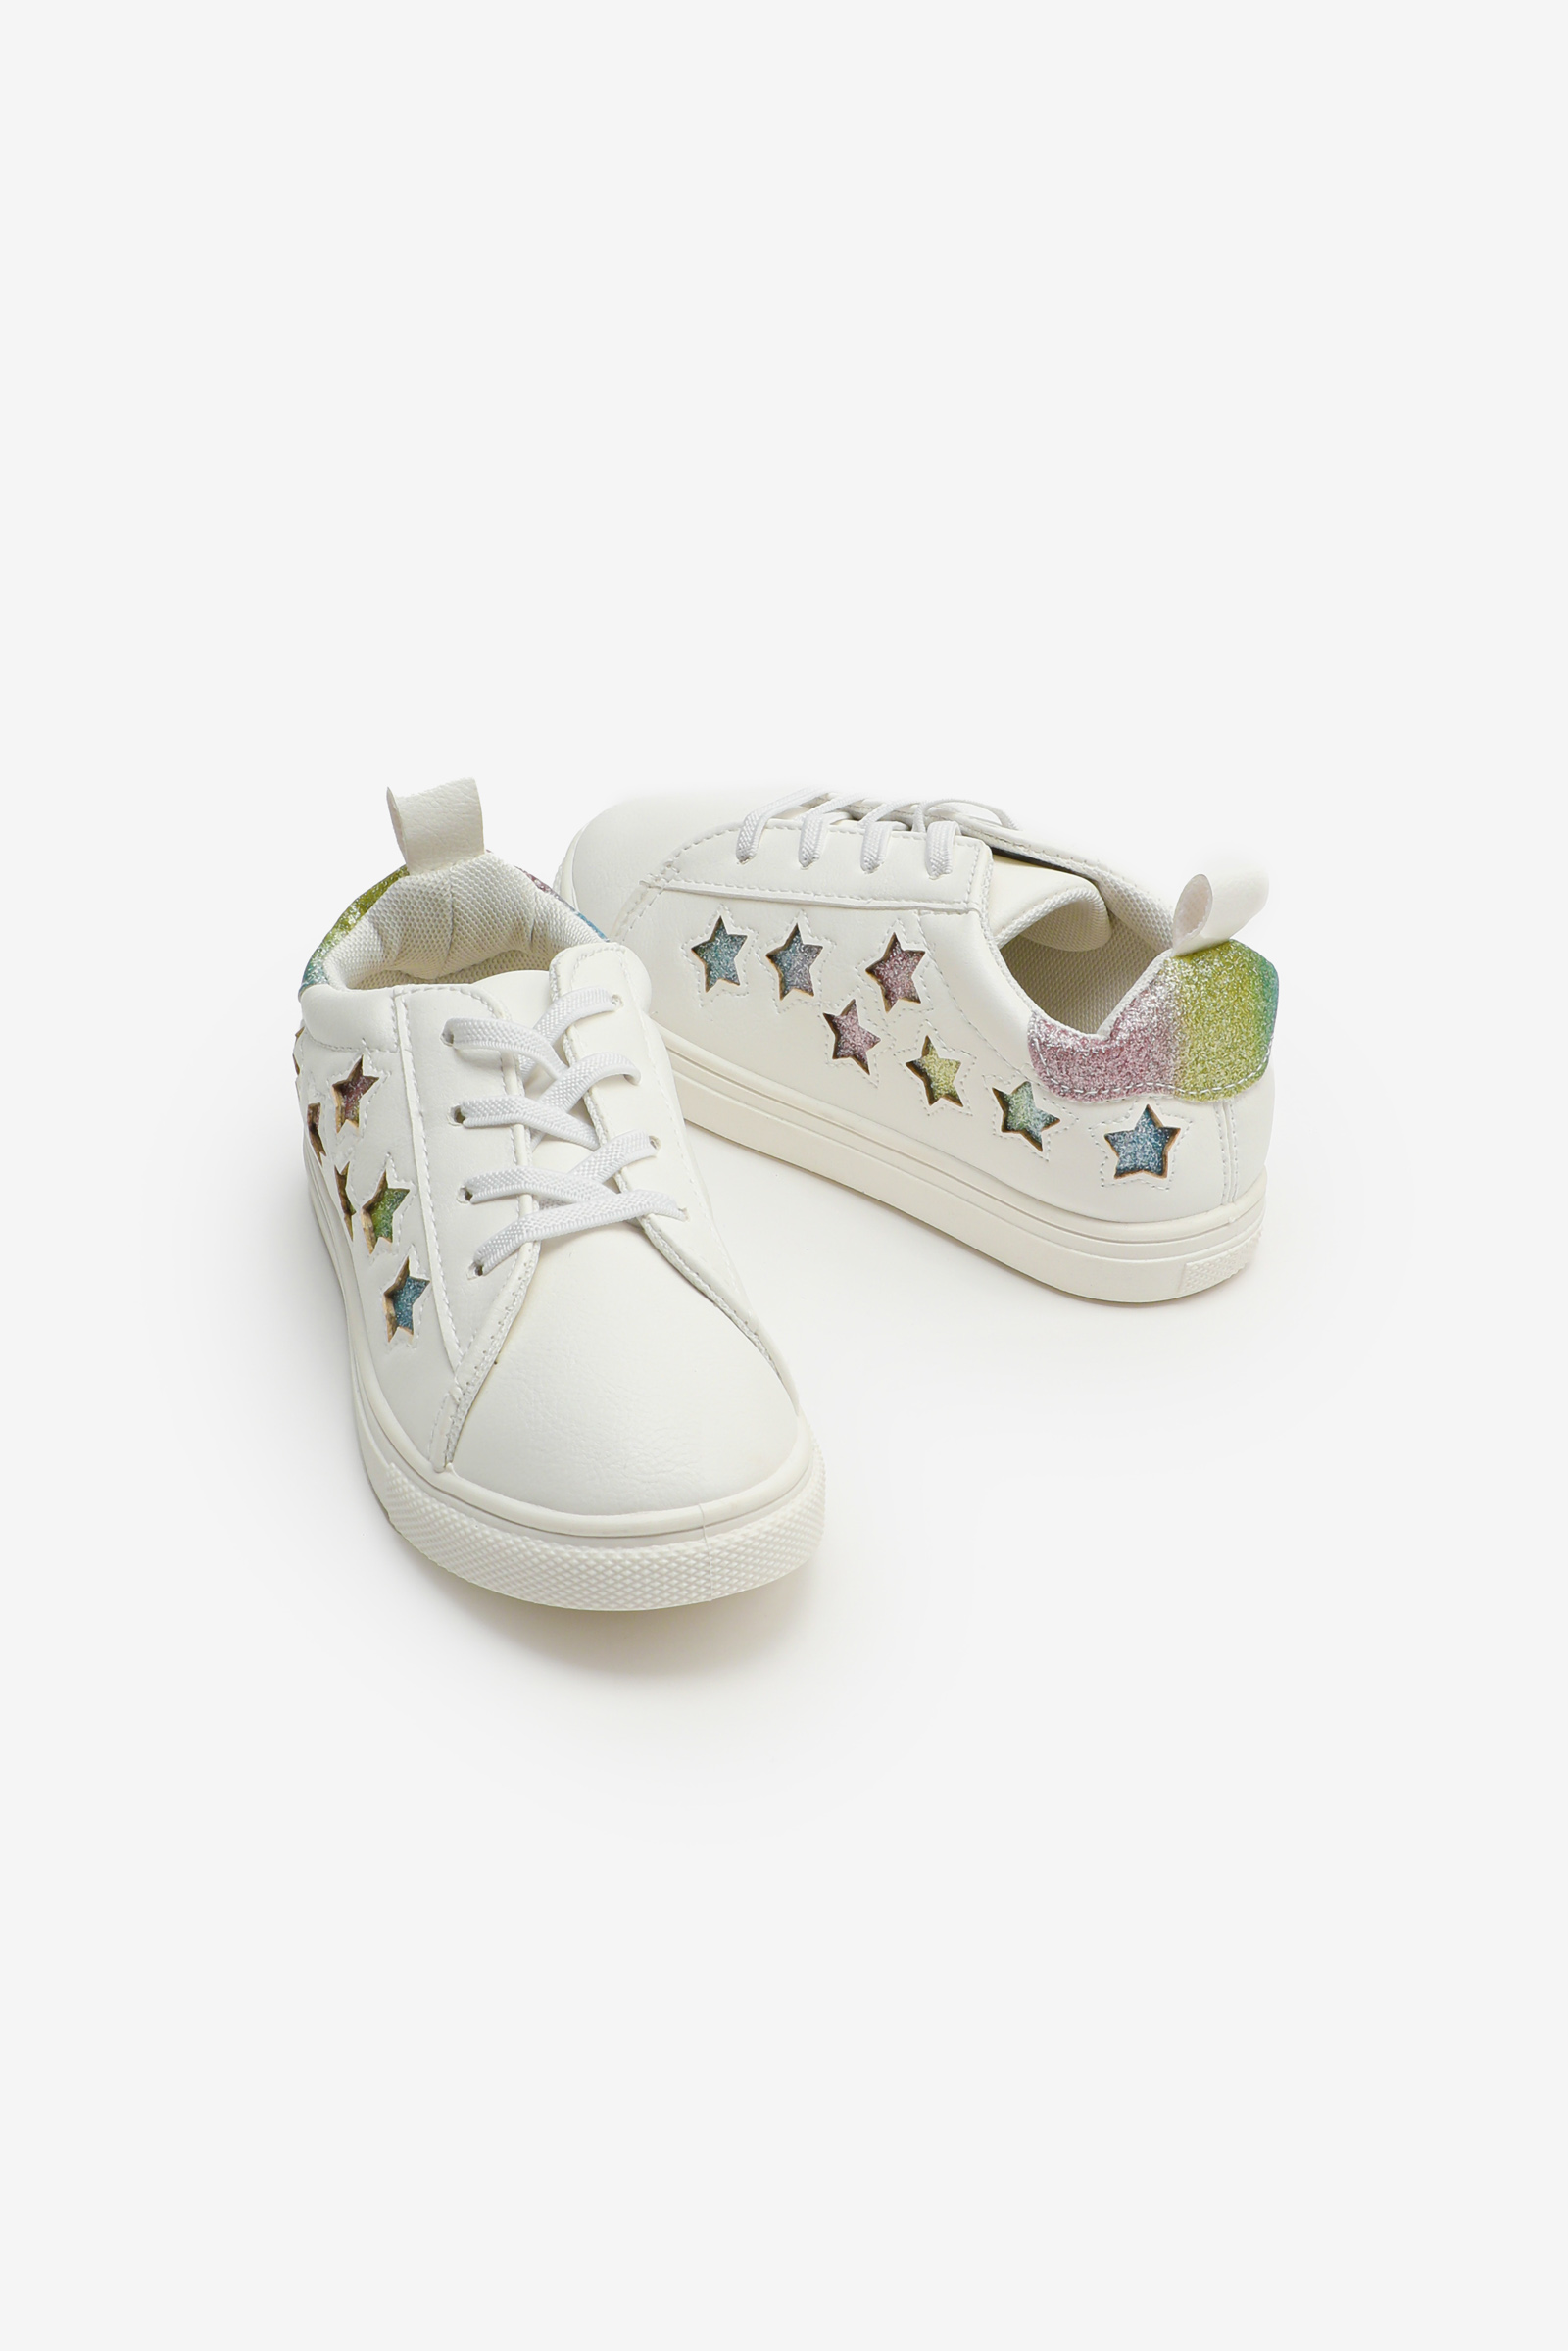 Rainbow Star Laced Sneakers for Girls